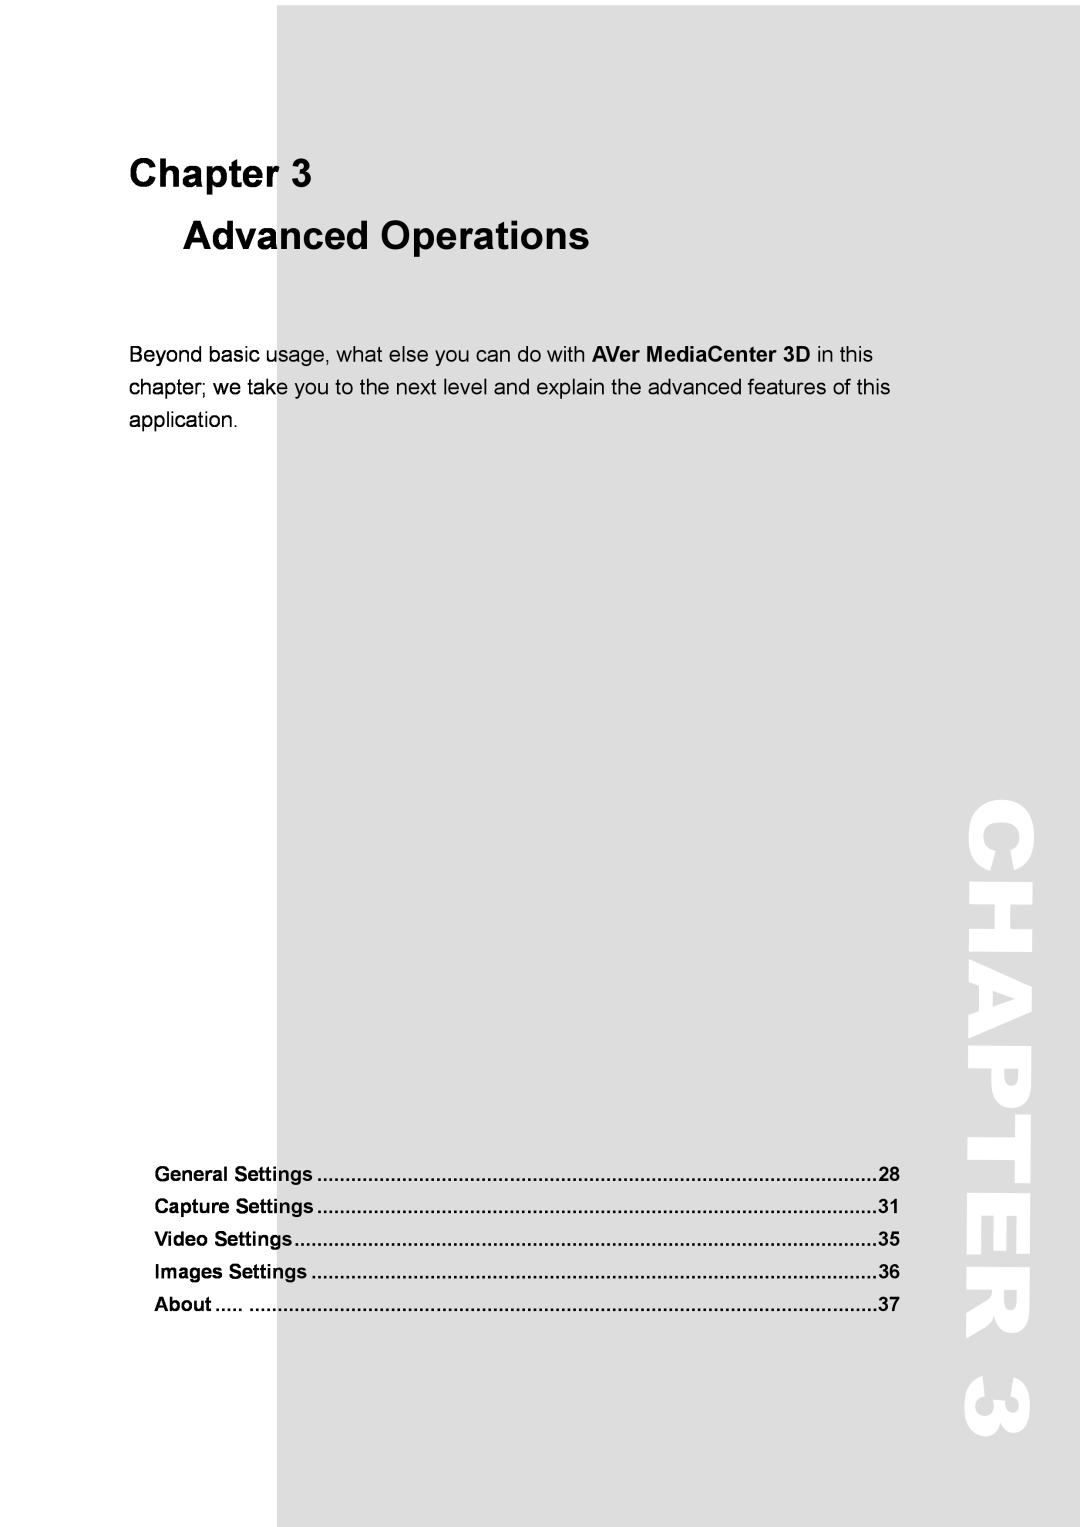 AVerMedia Technologies MTVHDDVRR Chapter Advanced Operations, General Settings, Capture Settings, Video Settings, About 